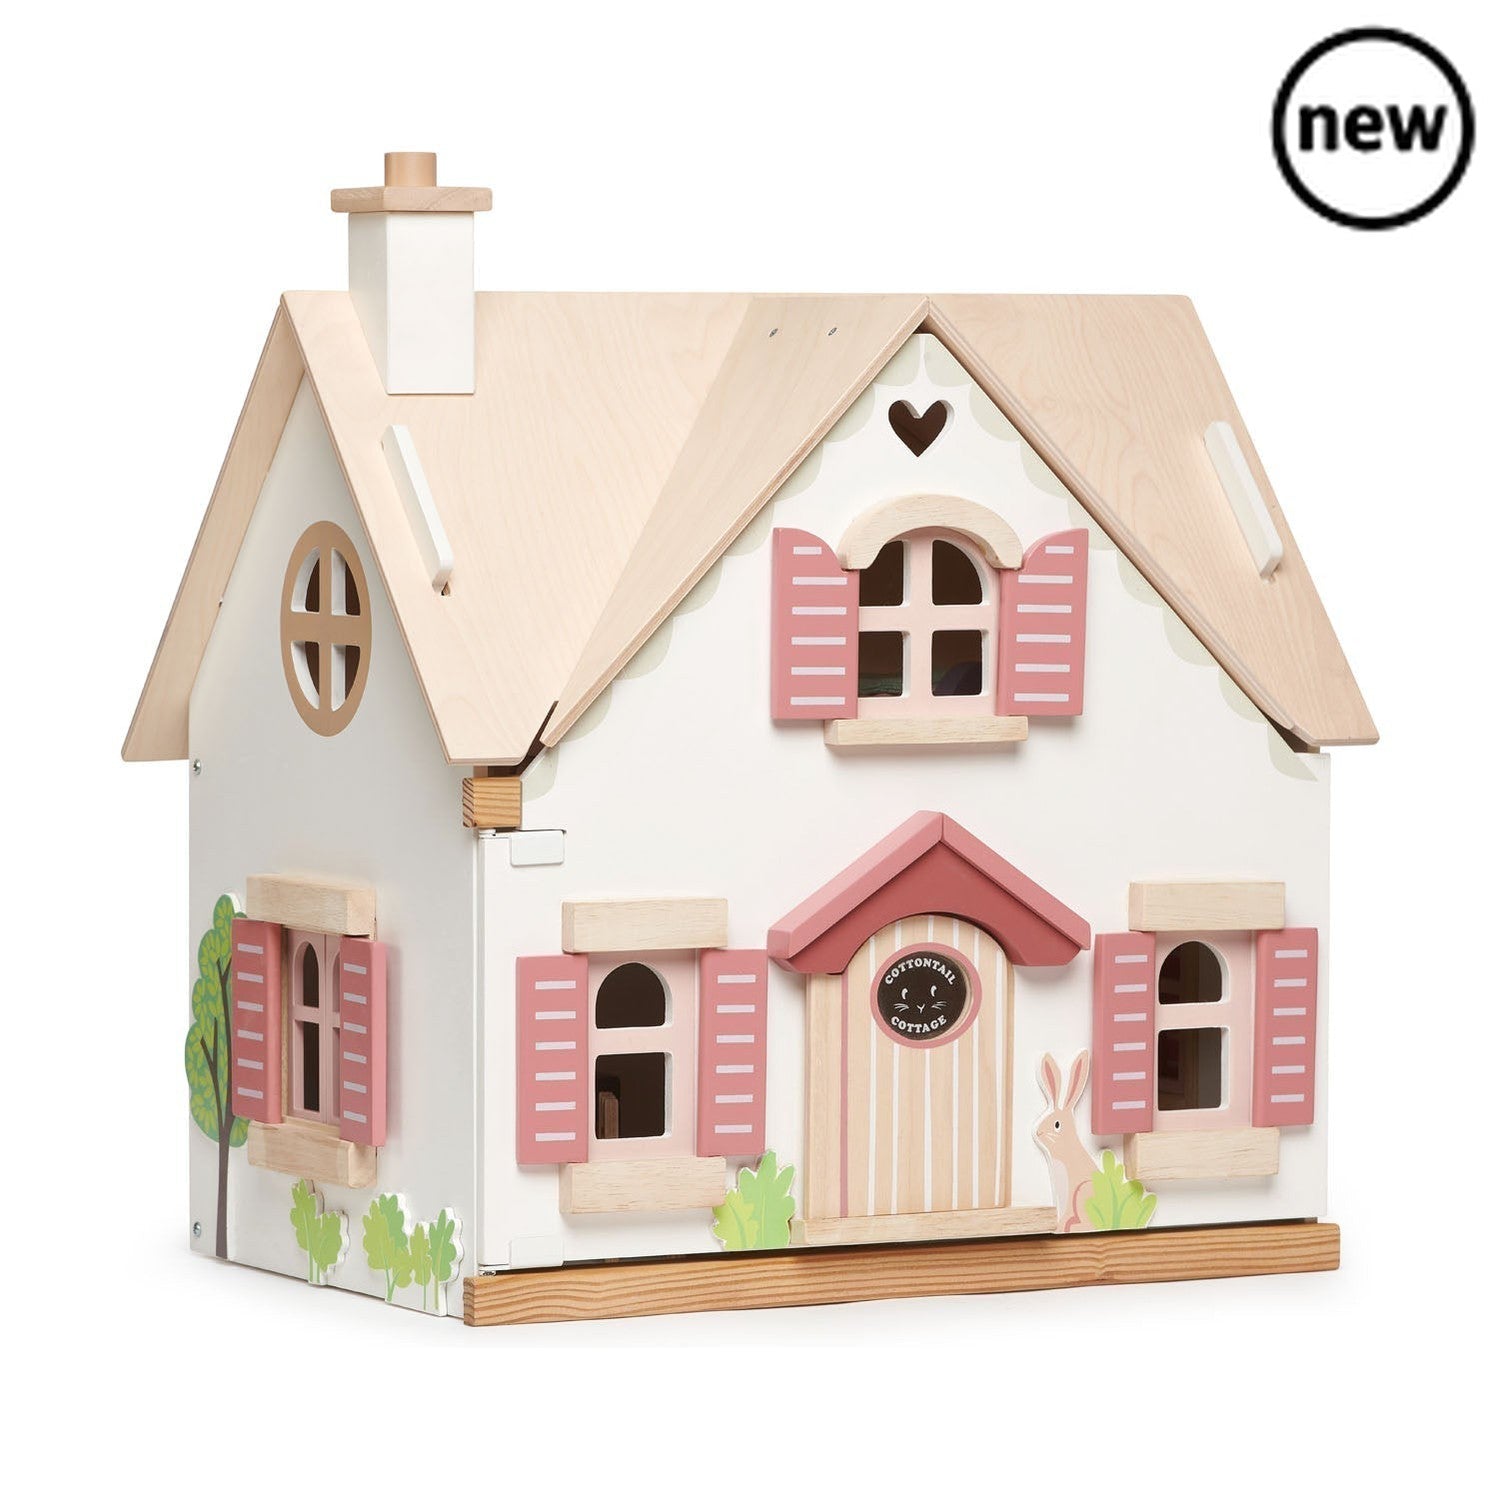 Cottontail Cottage + Furniture, The Cottontail Cottage Wooden Doll's House may just be your idea of a perfect home! This gorgeous wooden doll's house brings traditional play right into the heart of the home with everything you need to get started. This grand detached cottage is a playground for rabbits, who feature on the front of the house and are looked after with a big bowl of carrots to keep them happy. With a stylish room in the roof and a front that hinges open to reveal all the life inside, this is a